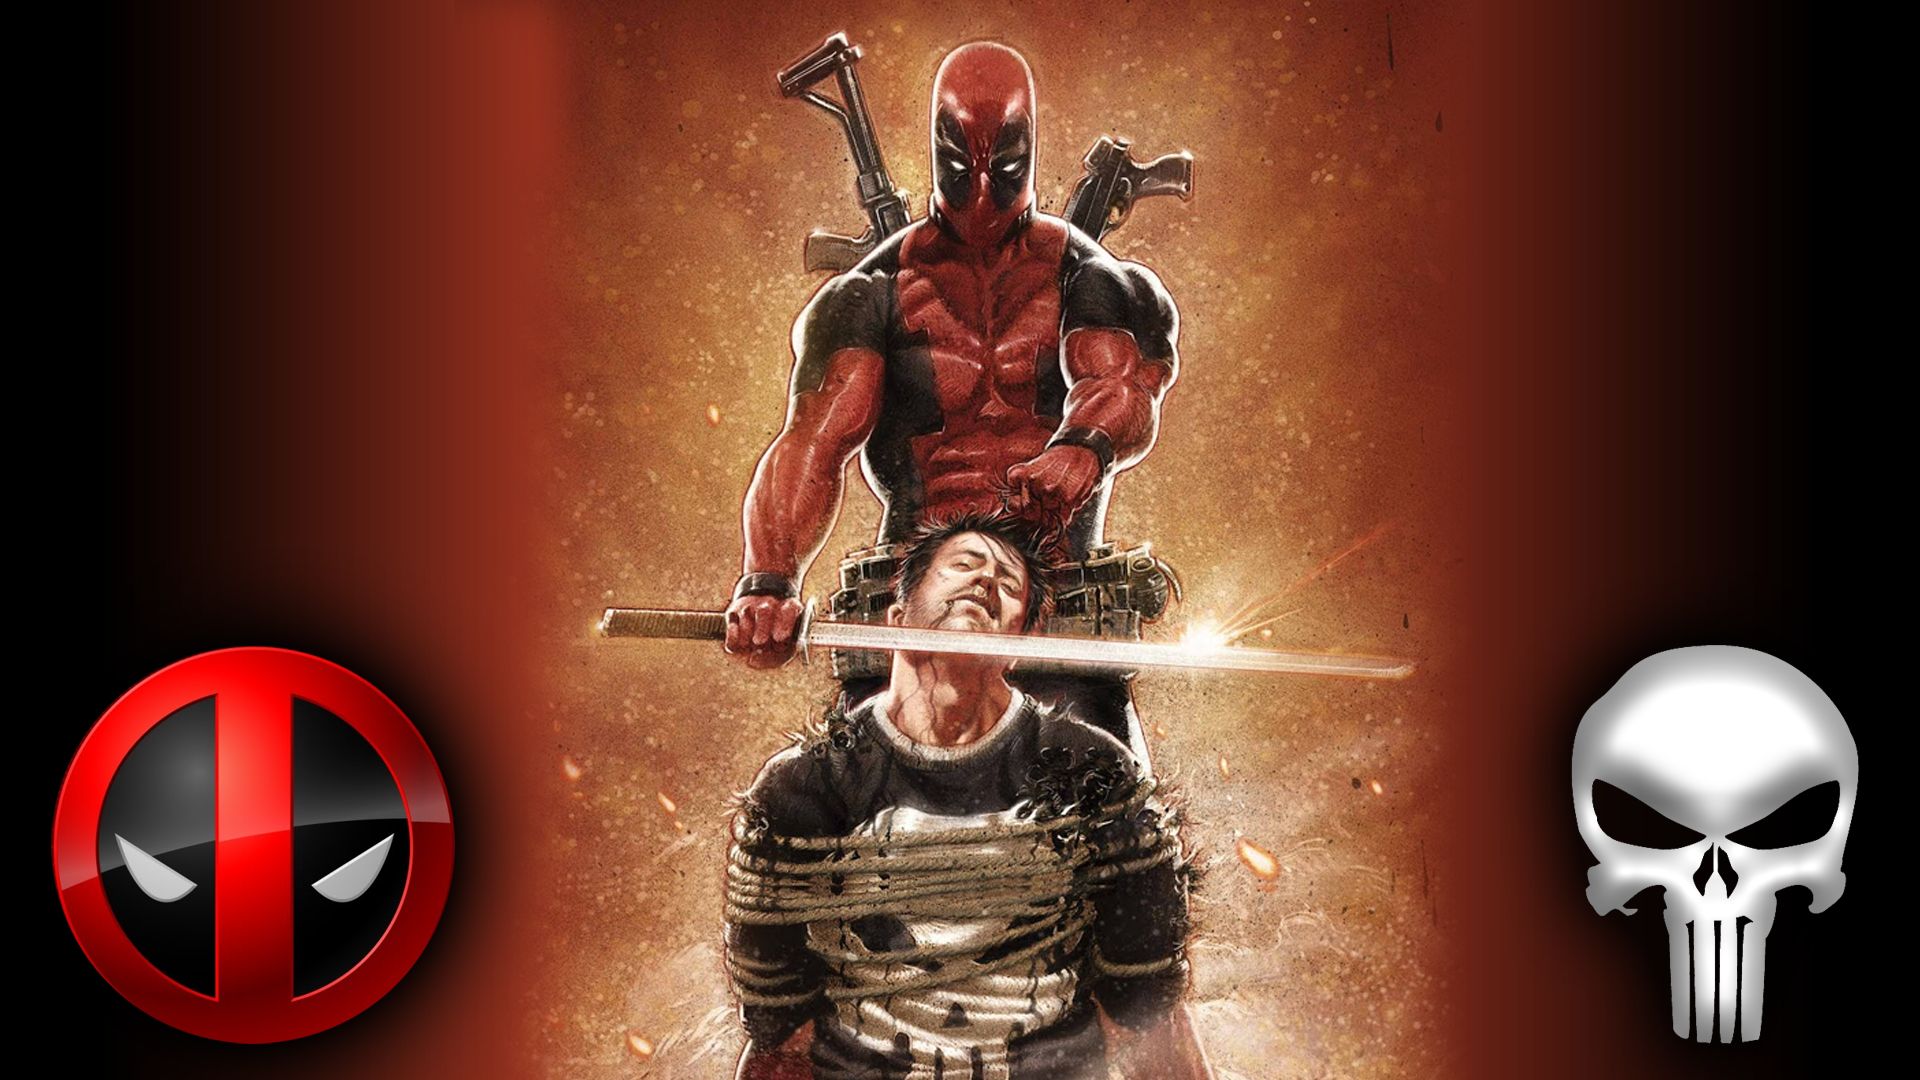 deadpool, comics, merc with a mouth, punisher lock screen backgrounds